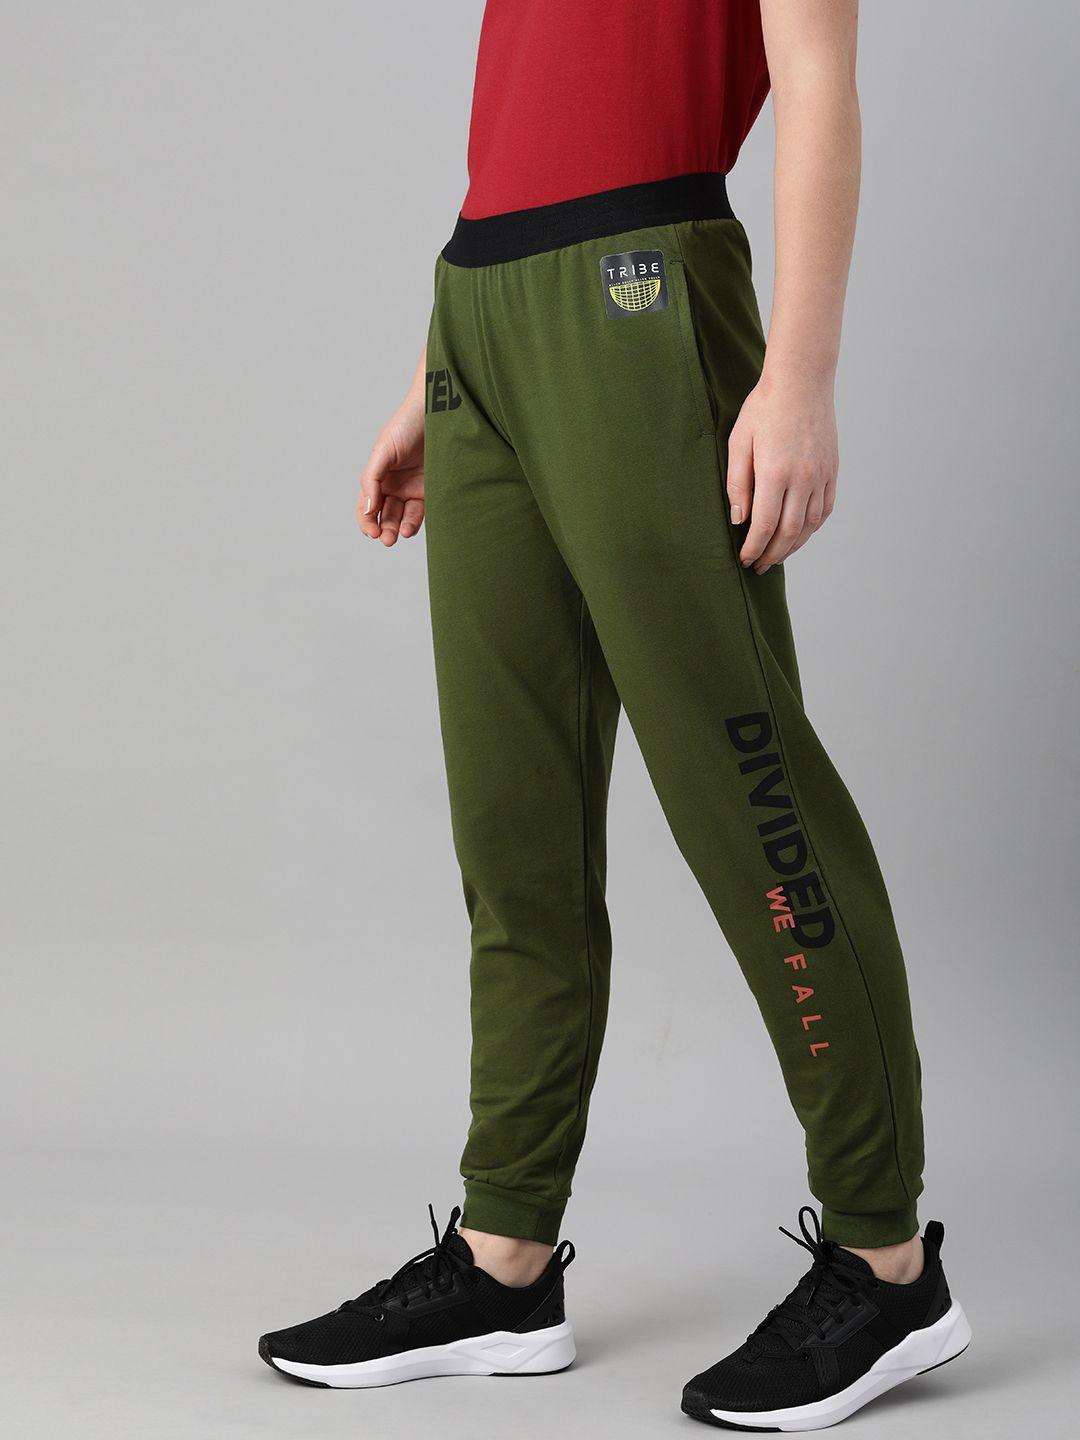 Allen Solly Tribe Women Olive Green & Black Regular Fit Printed Joggers